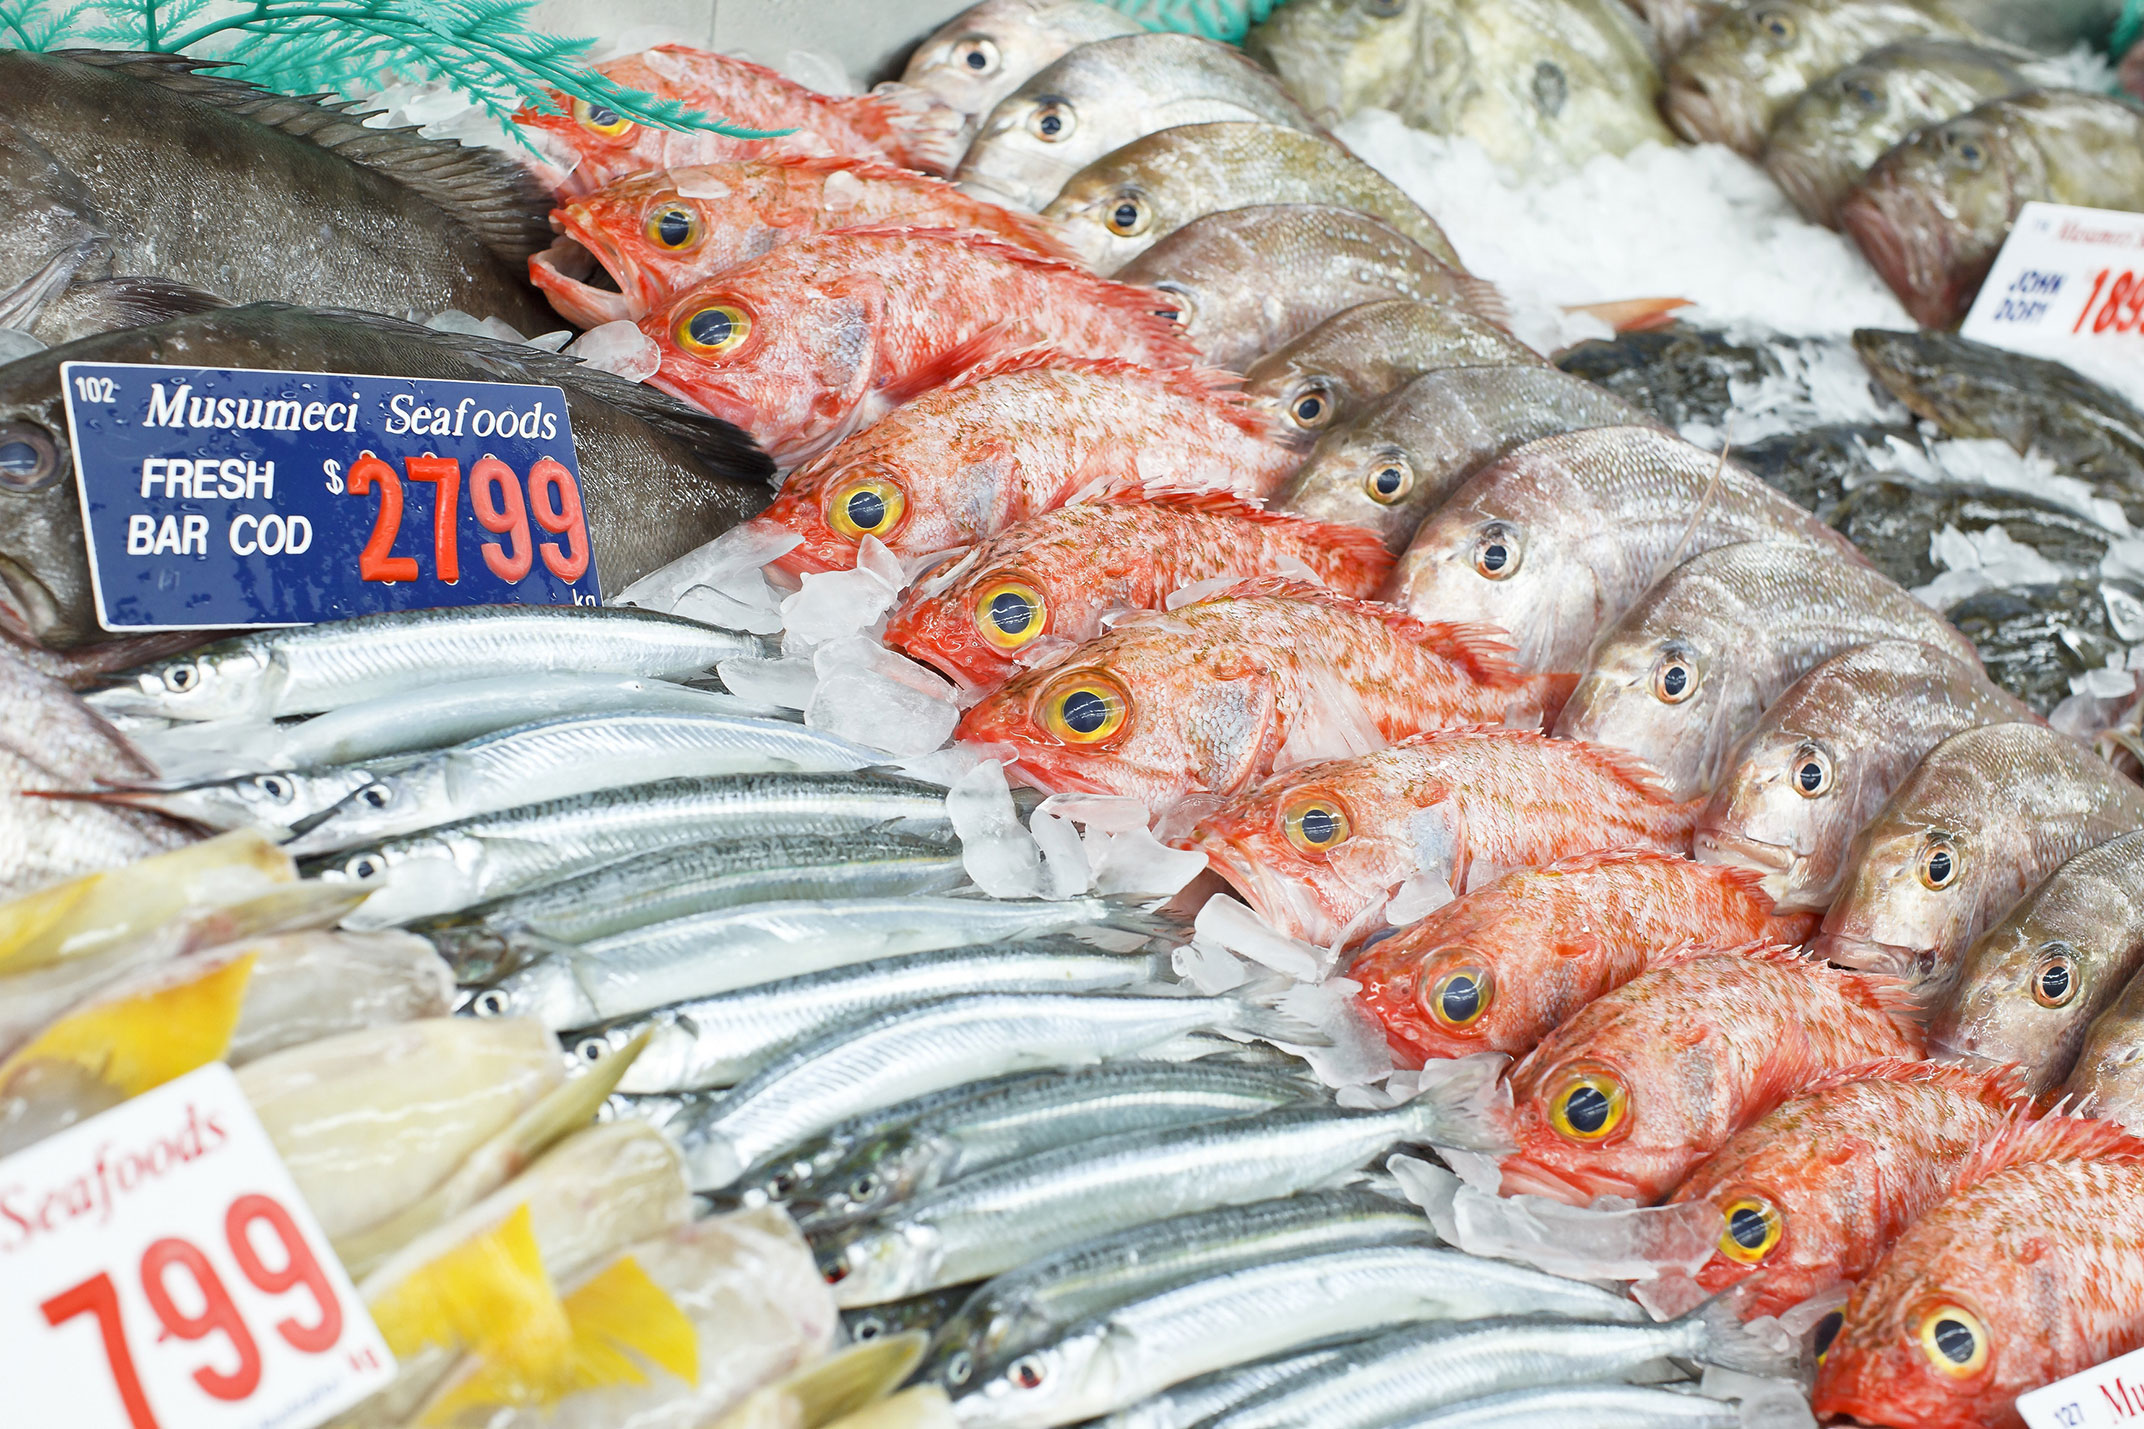 Fish Market dreams meaning - Interpretation and Meaning